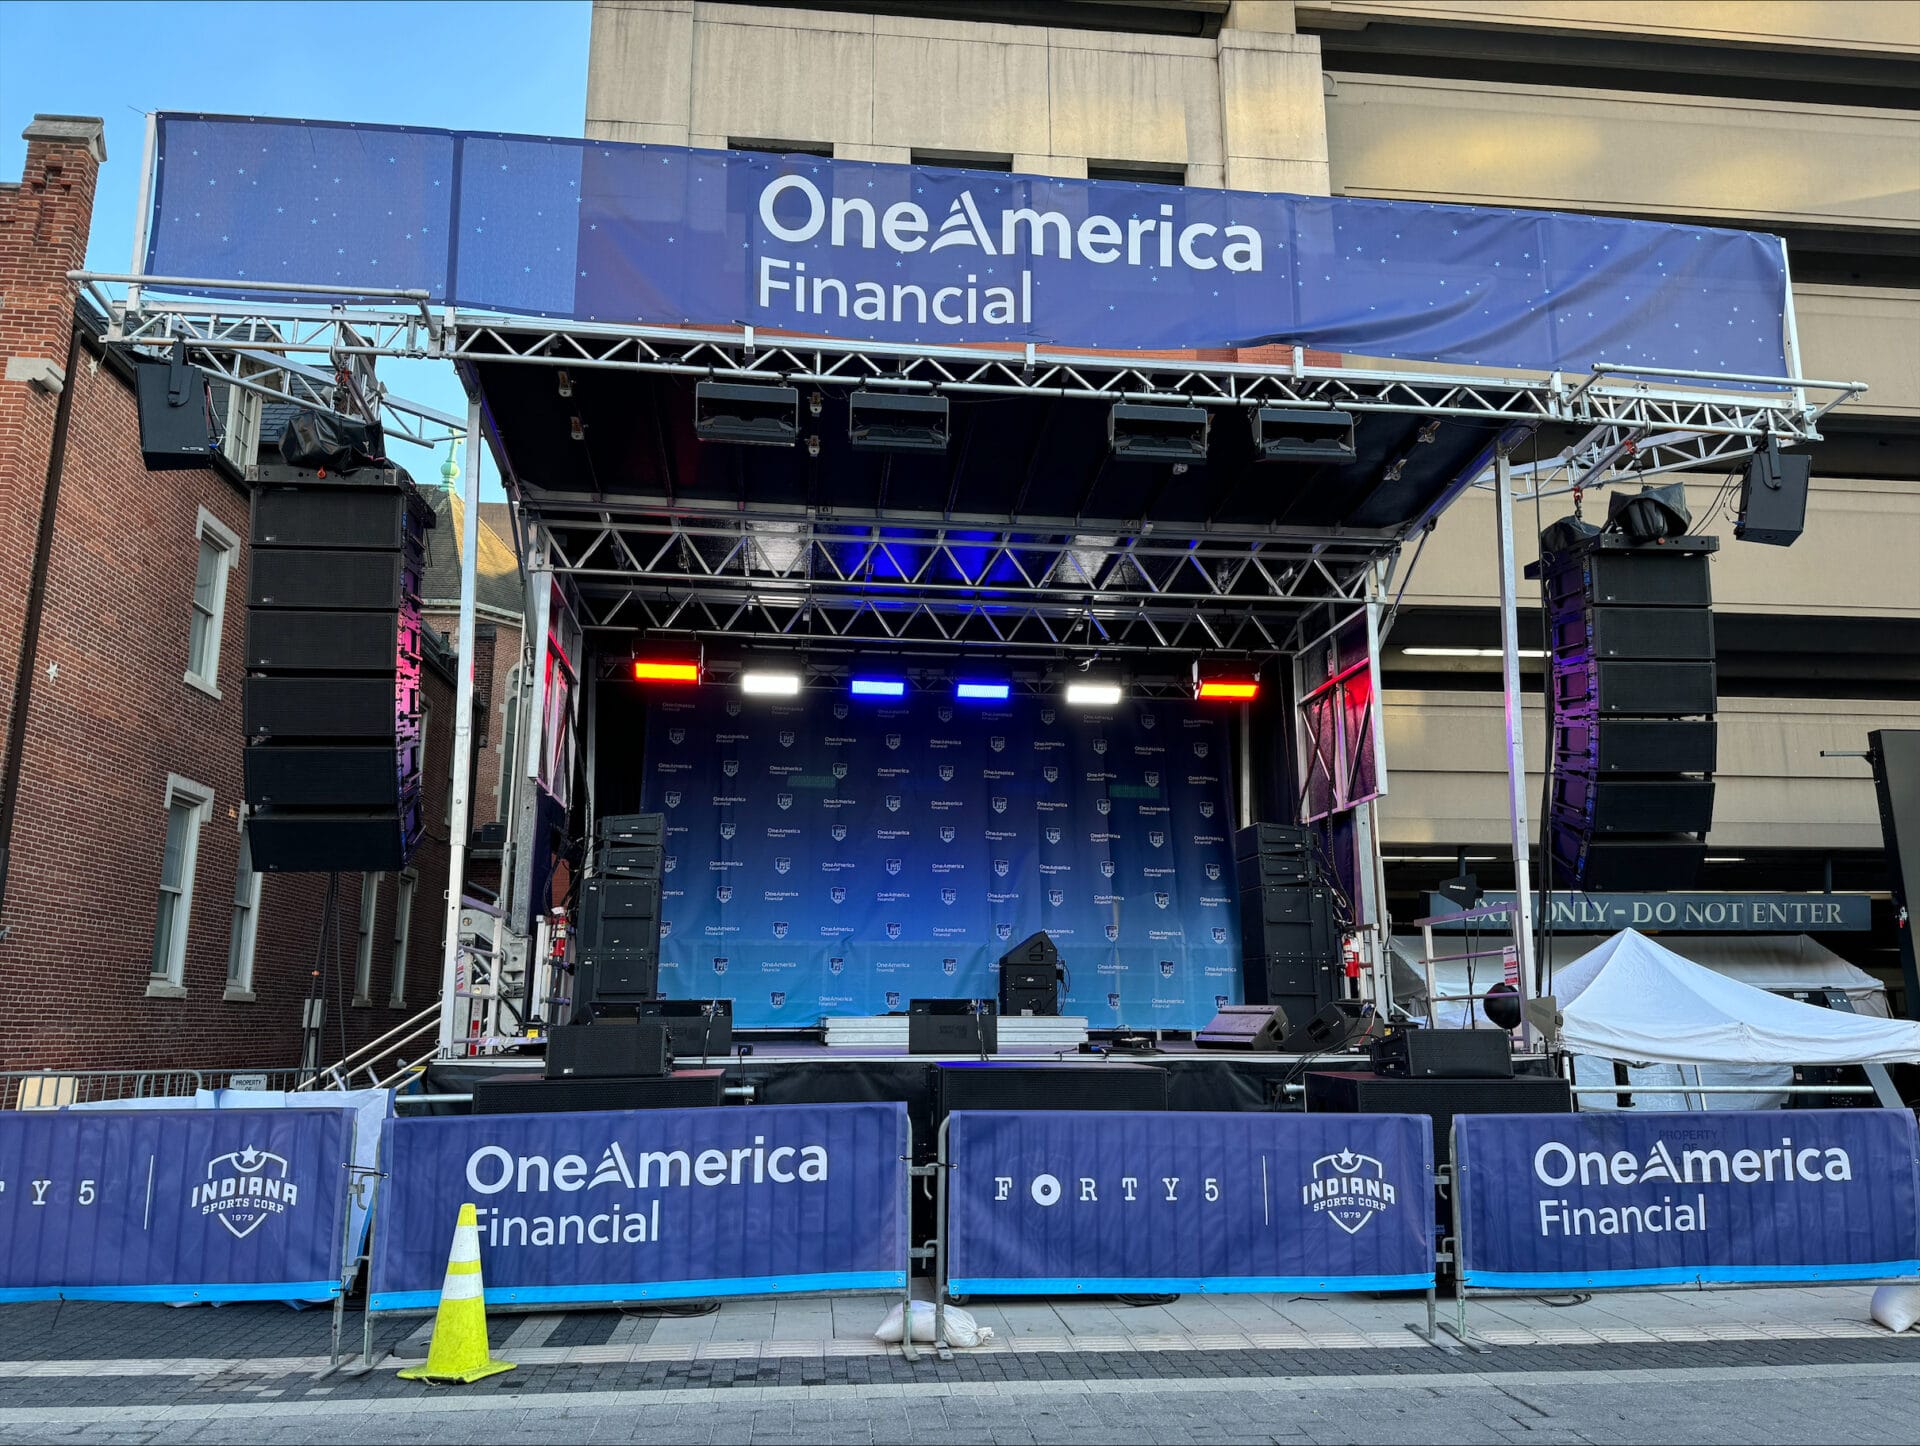 USA Swimming LIVE Presented by Purdue University will kick off at 5 PM on June 14 with The Starting Block Party featuring the Bloomington-based high energy funk band The Main Squeeze. They will perform on the OneAmerica Financial Stage on Georgia Street from 8 - 9:30 p.m. (WISH Photo/Colin Baillie)